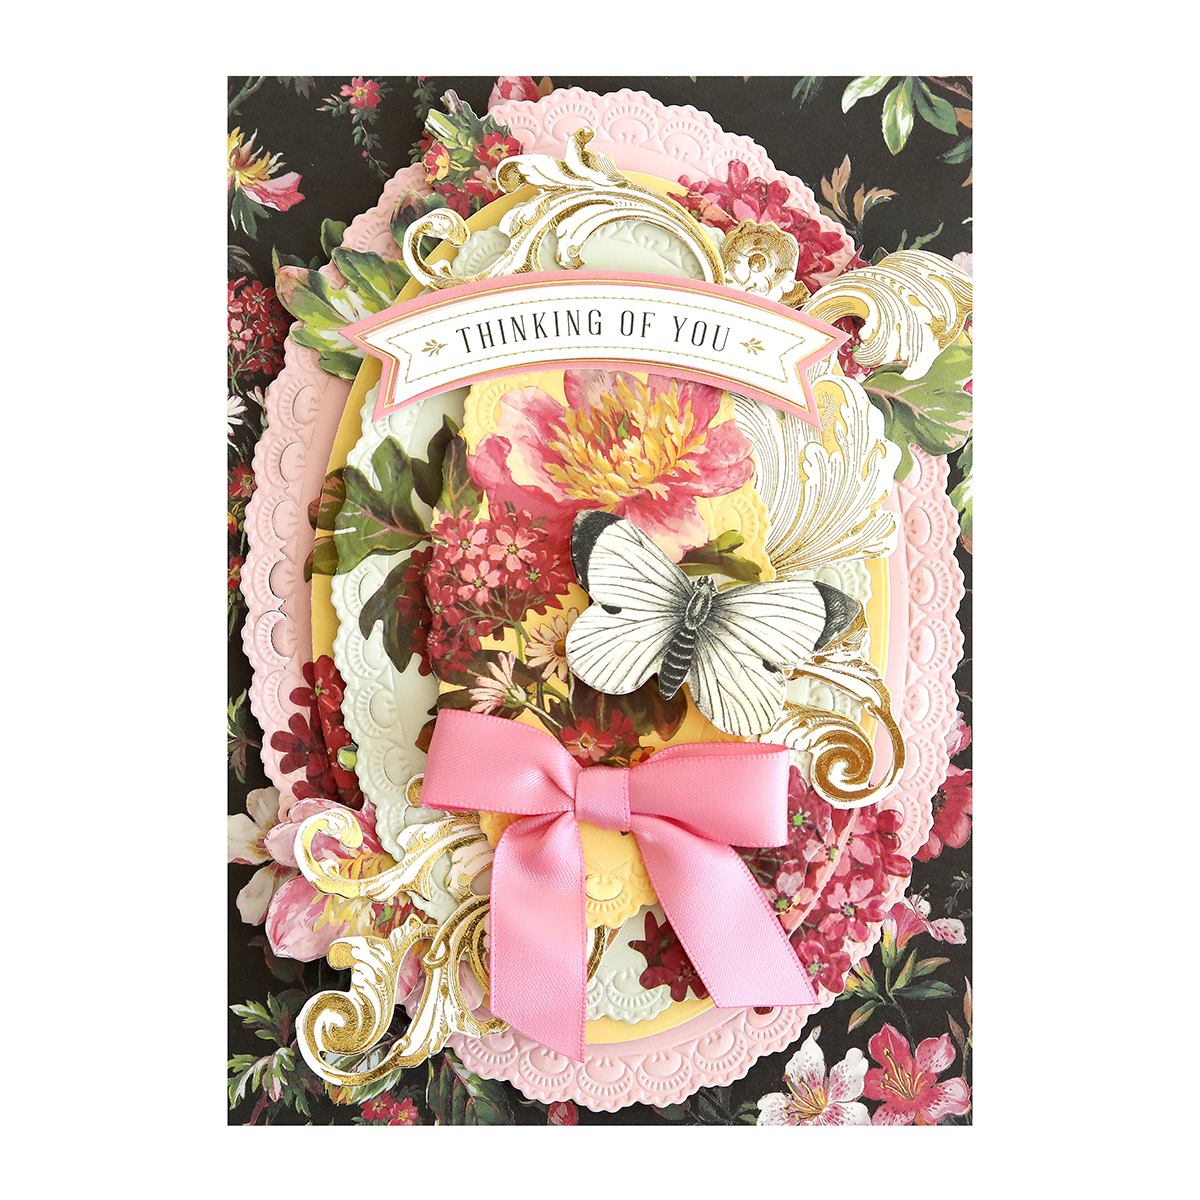 a card with a pink bow and flowers.